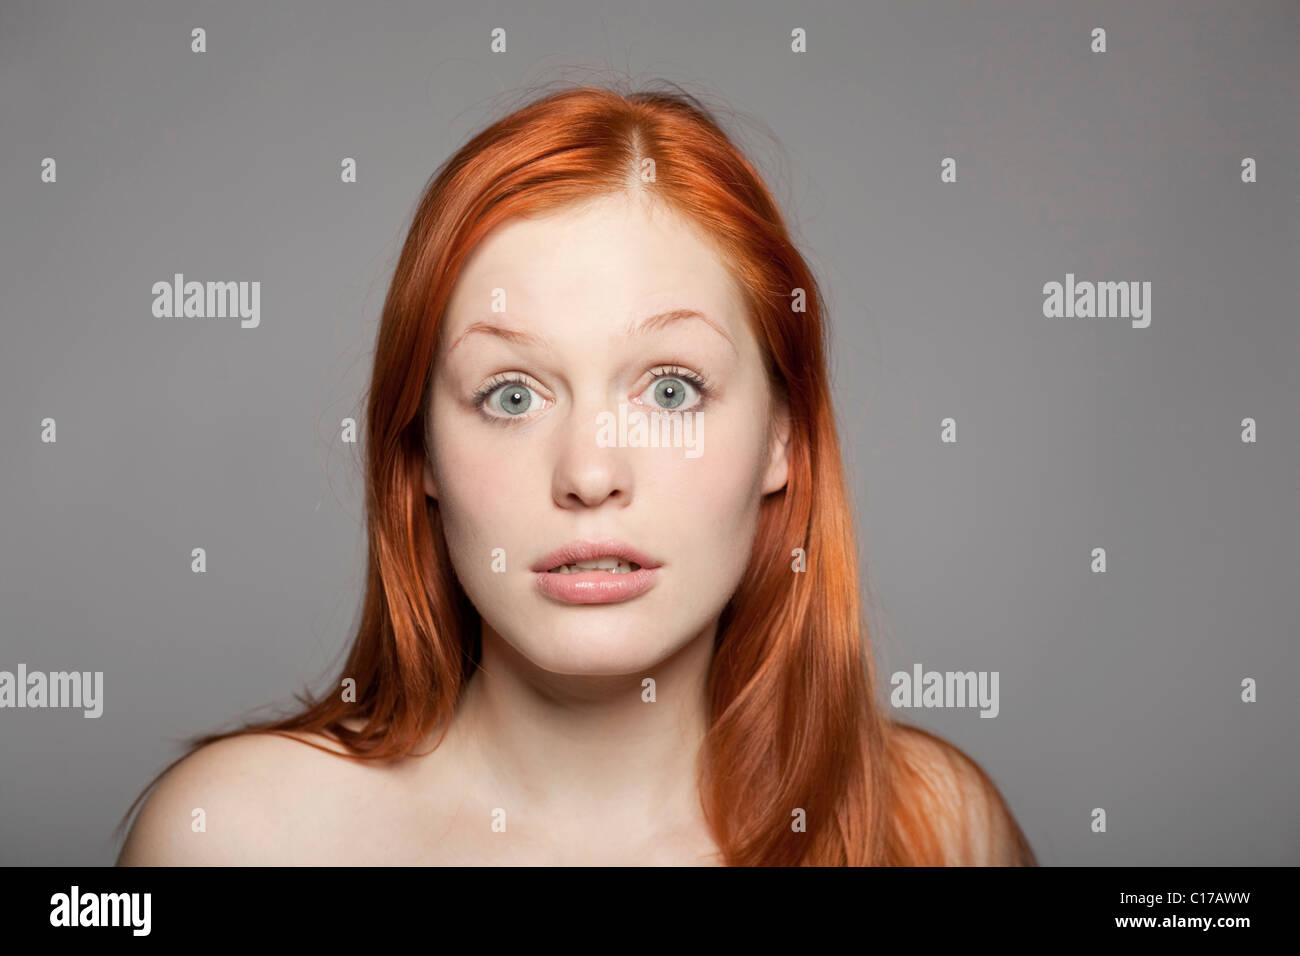 Surprised, young, red-haired woman looking into the camera Stock Photo